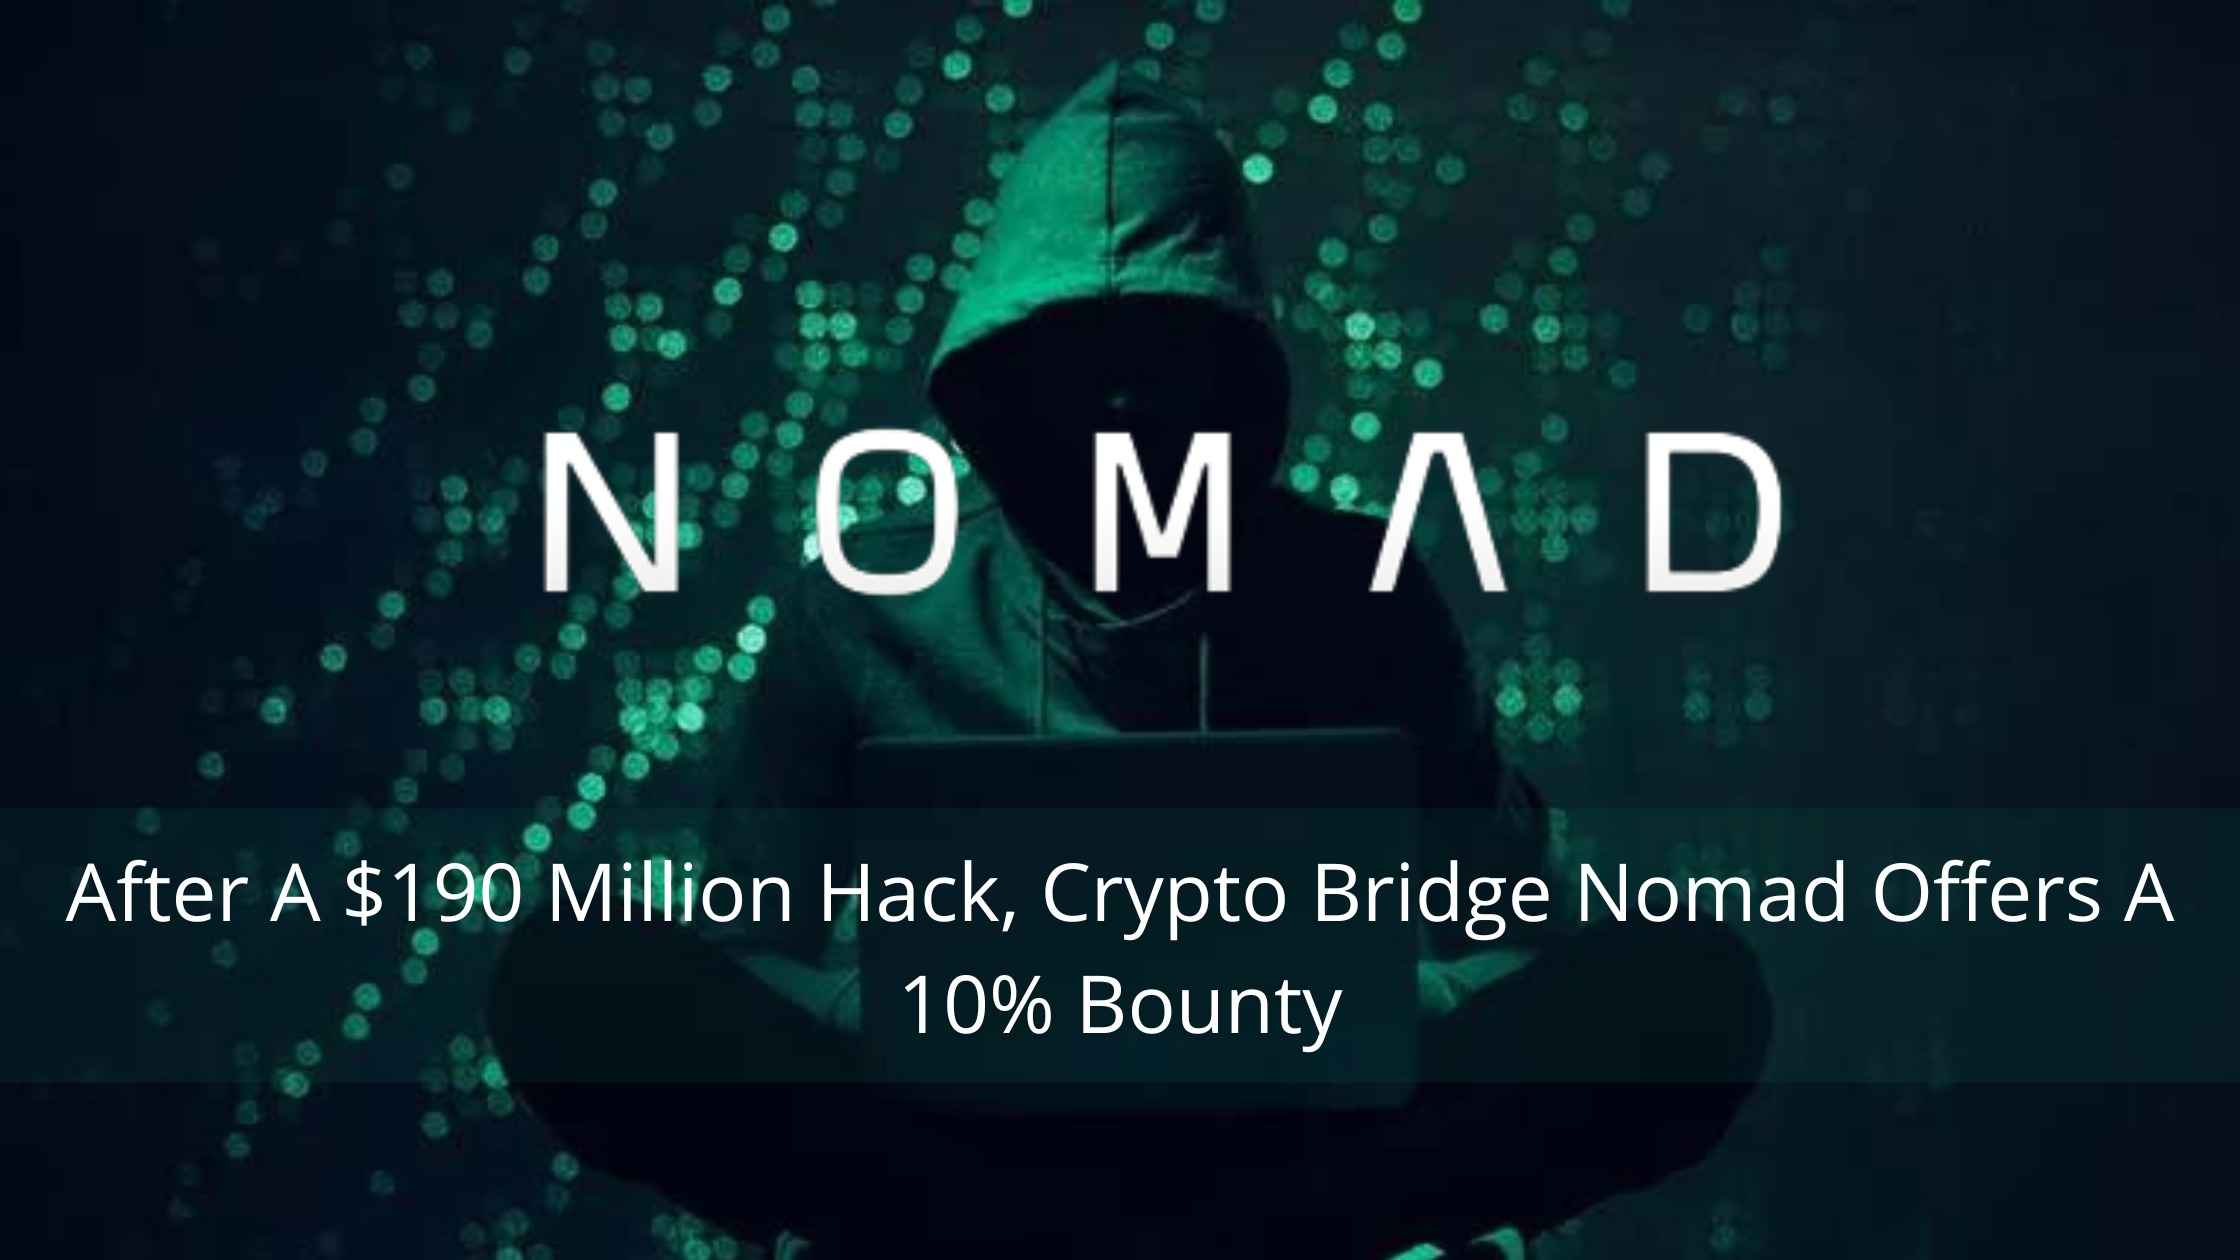 After A $190 Million Hack, Crypto Bridge Nomad Offers A 10% Bounty